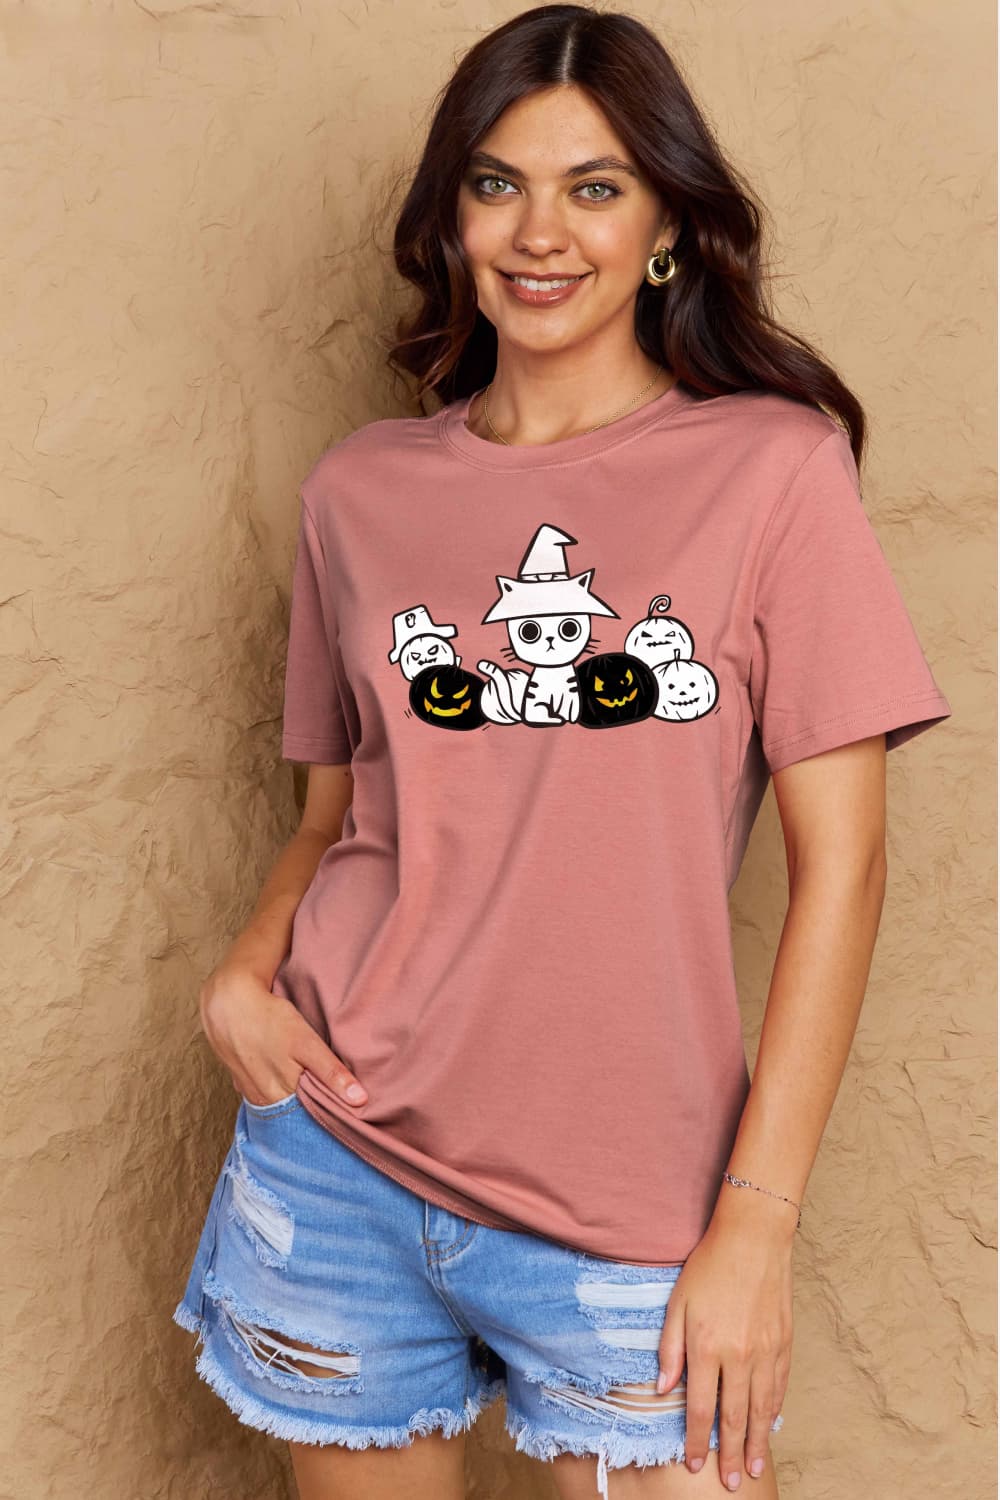 Simply Love Graphic T-shirts Dusty Pink / S Full Size Cat & Pumpkin Graphic Cotton T-Shirt